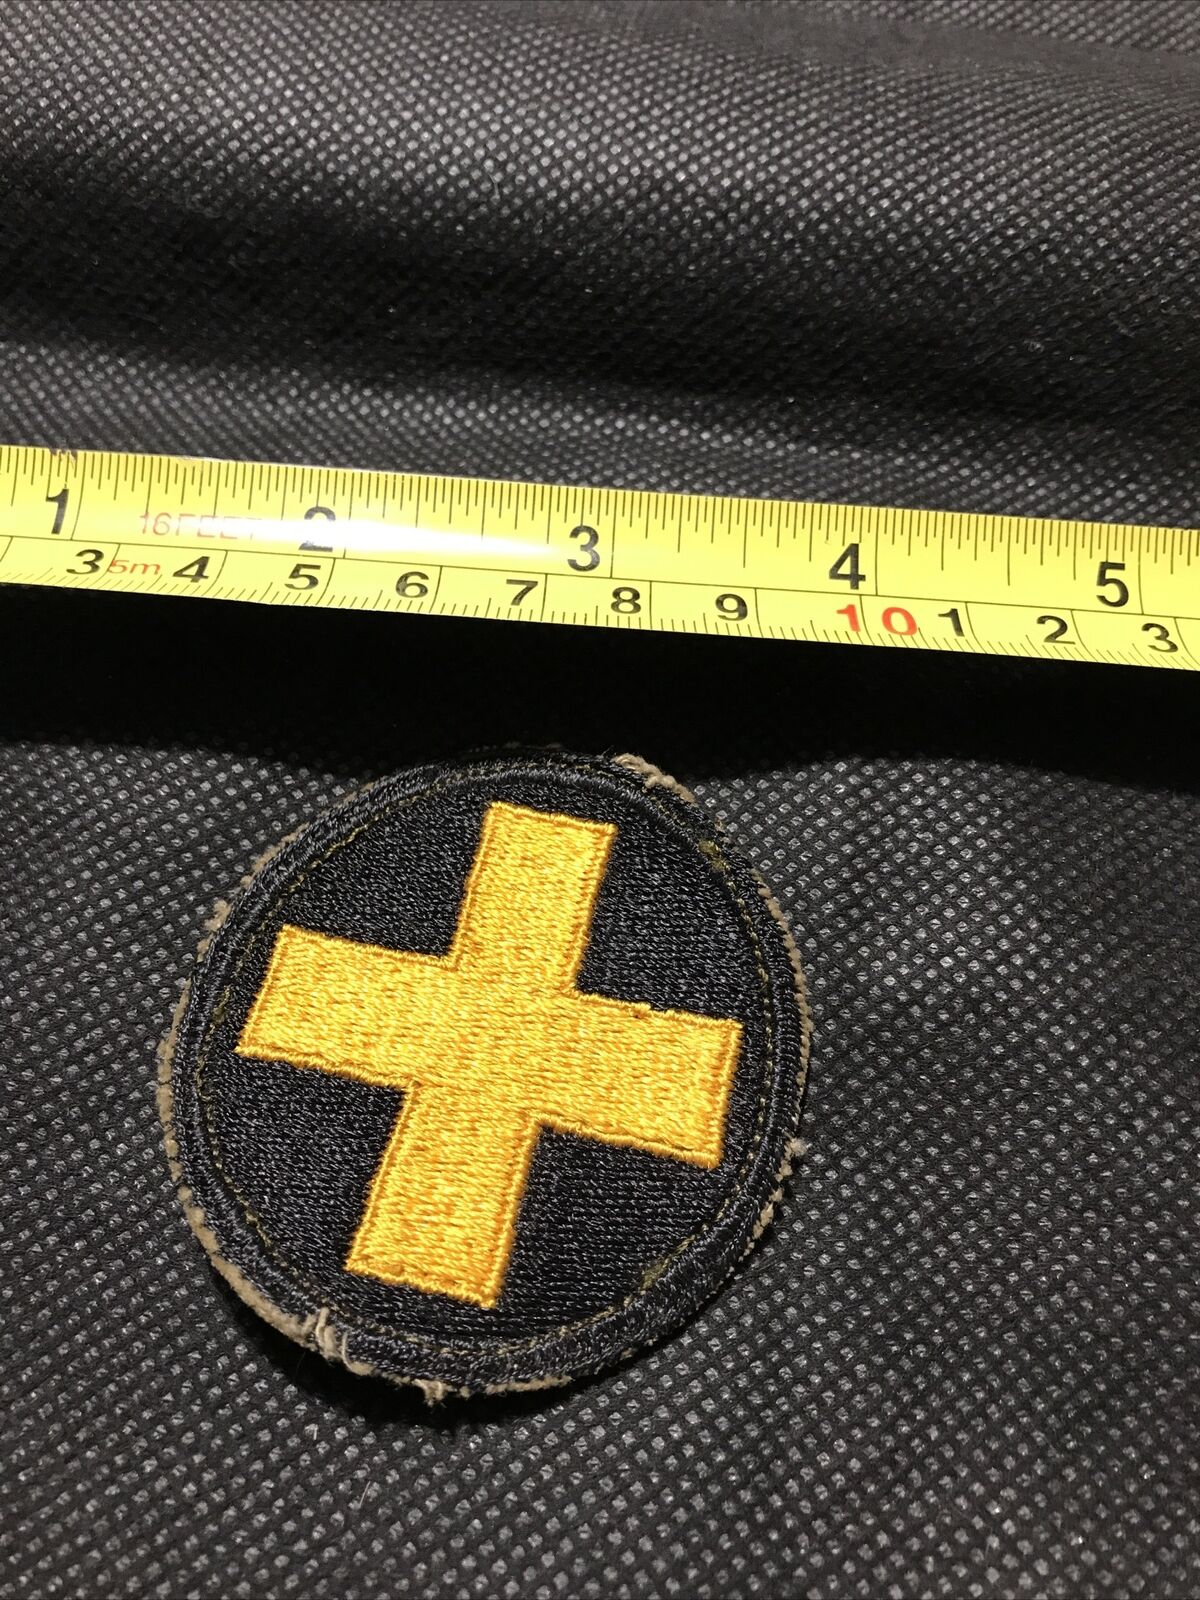 WW2 Vintage 33rd INFANTRY DIVISION US ARMY PATCH Cut Edge Used Original No Glow